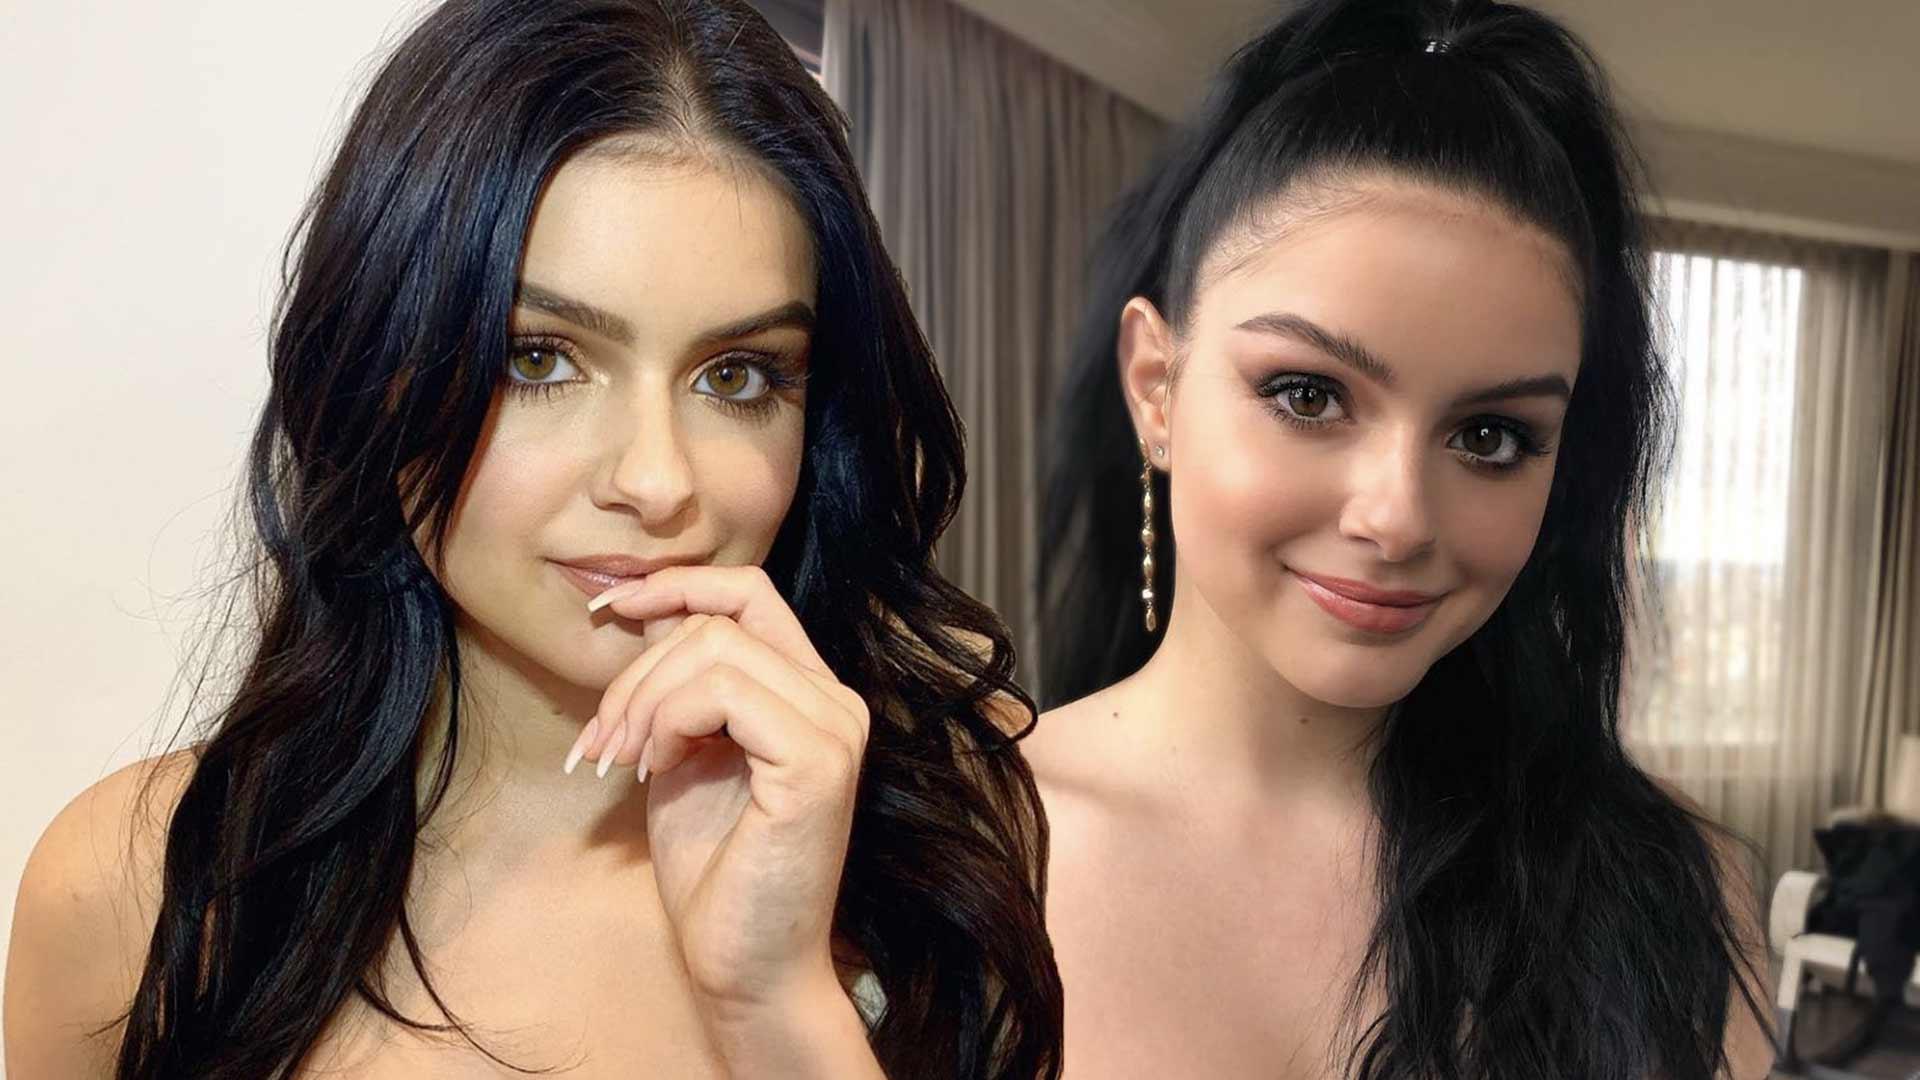 ‘Modern Family’ Star Ariel Winter Caught In Traffic With Bra Exposed